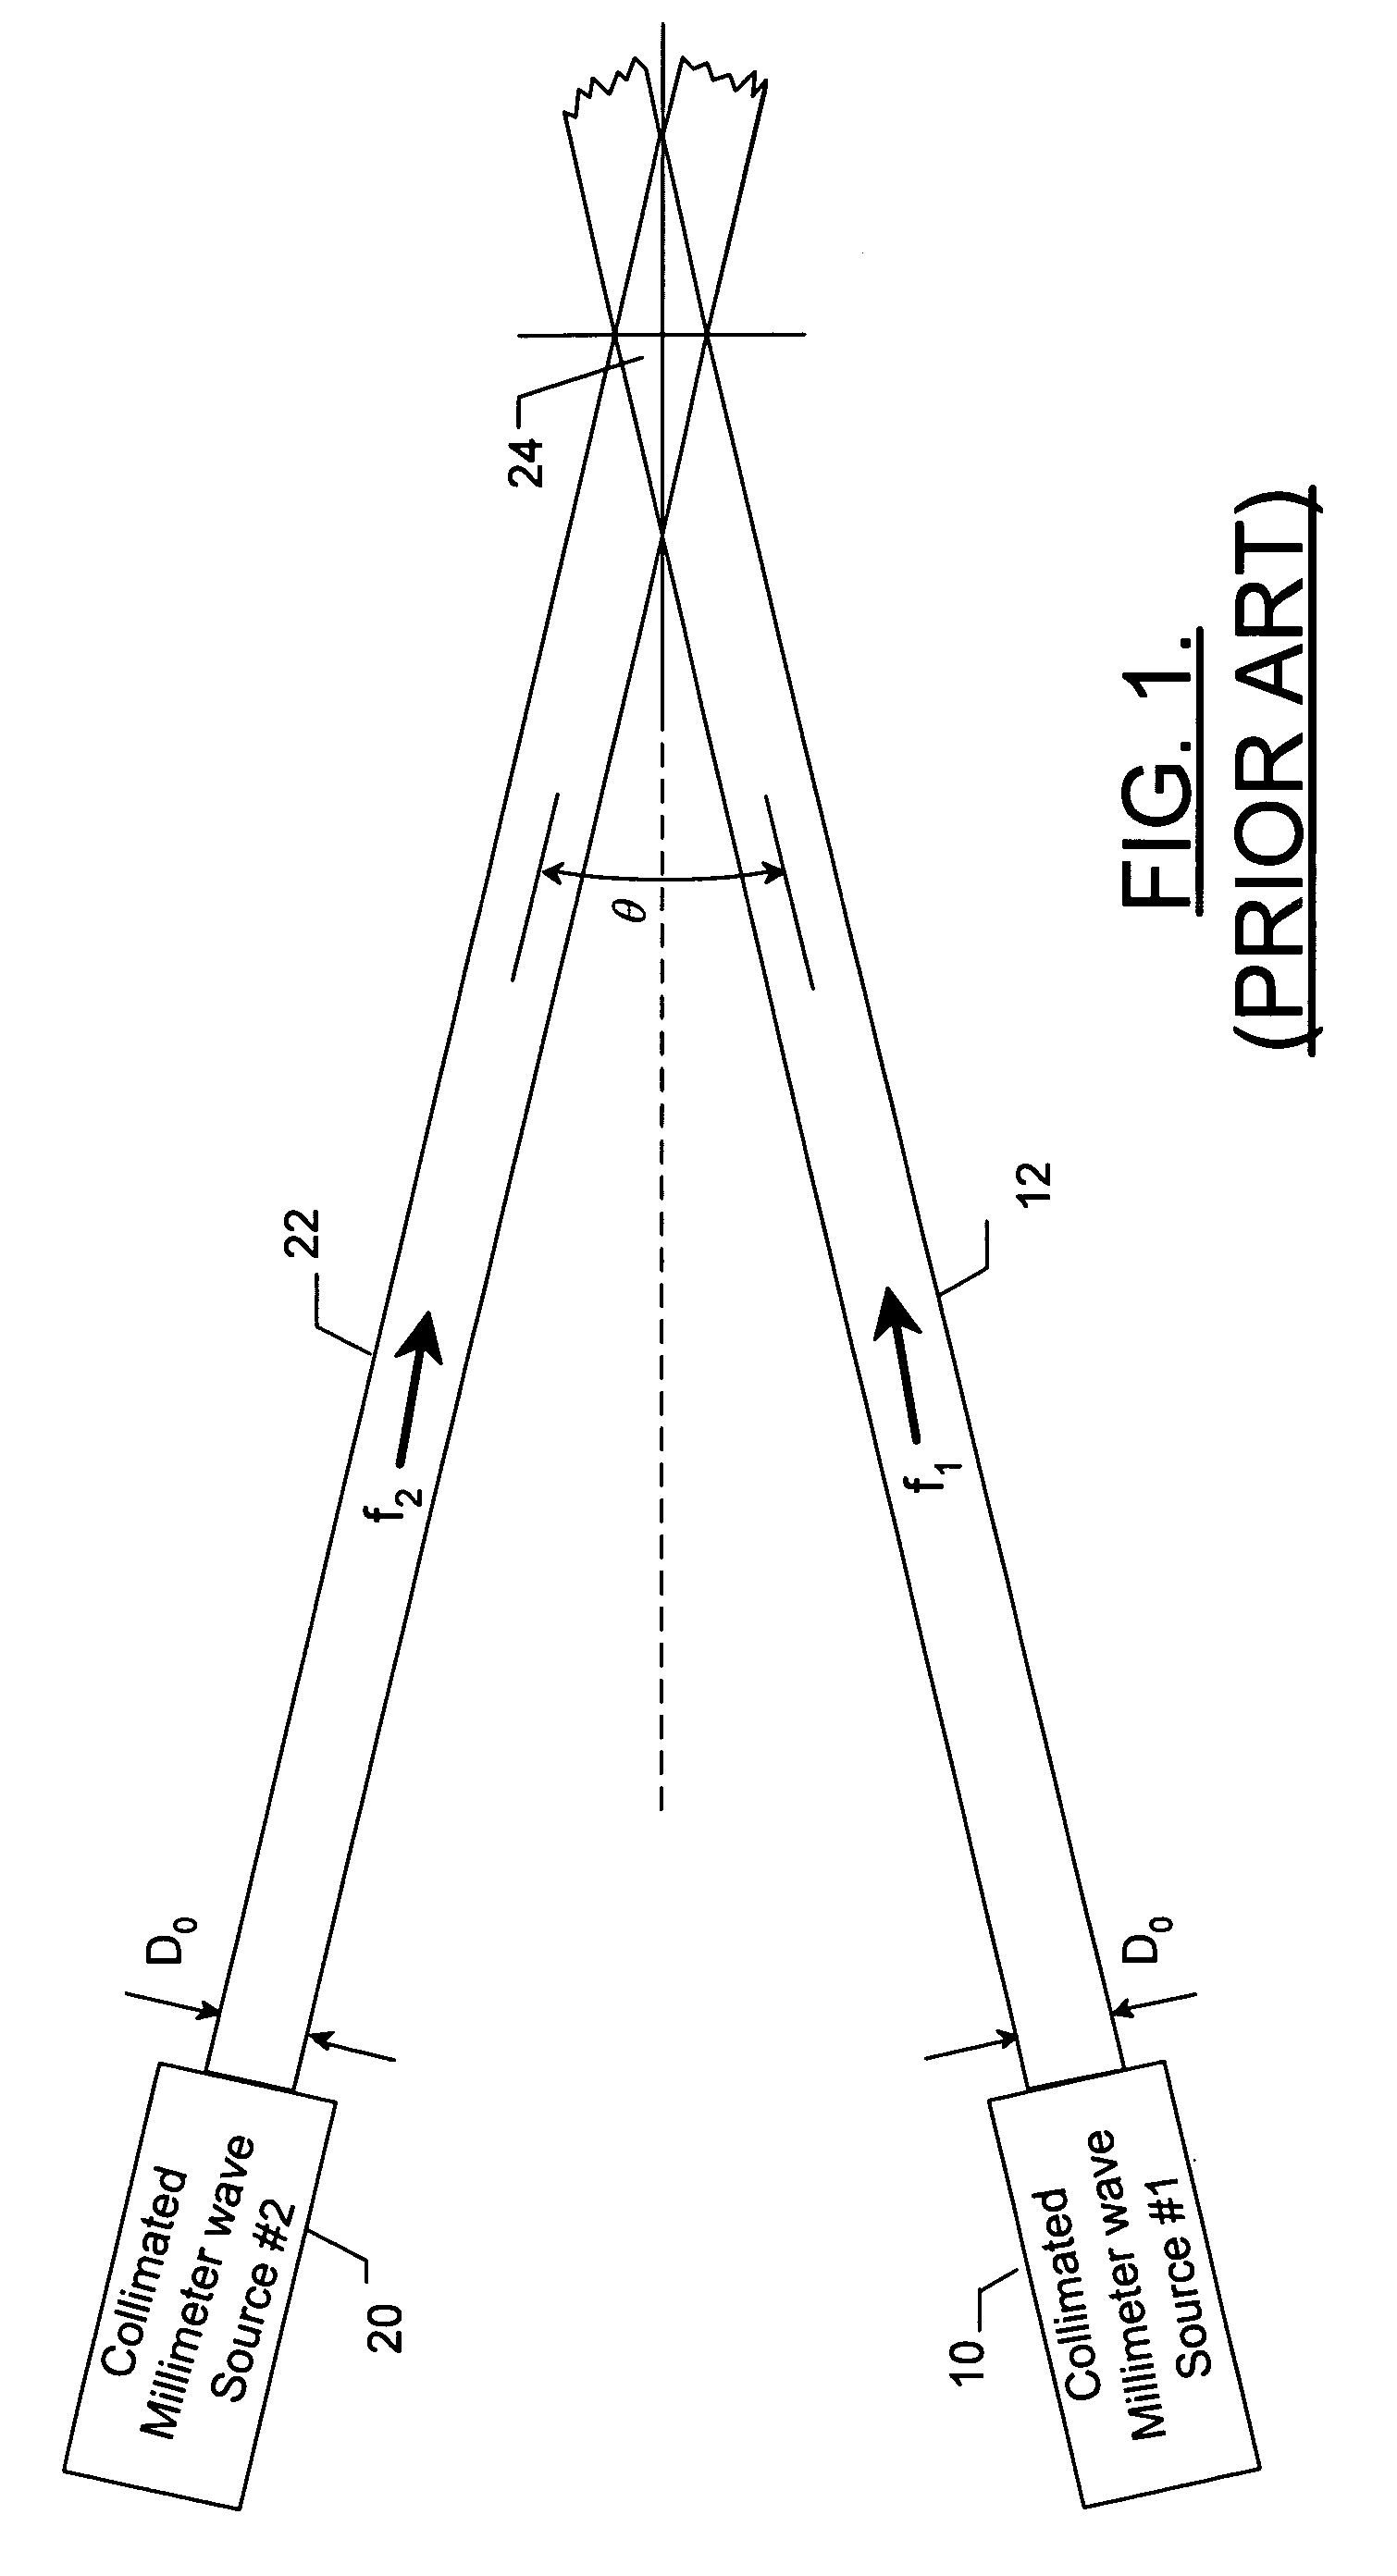 Method and apparatus for detecting, locating, and identifying microwave transmitters and receivers at distant locations